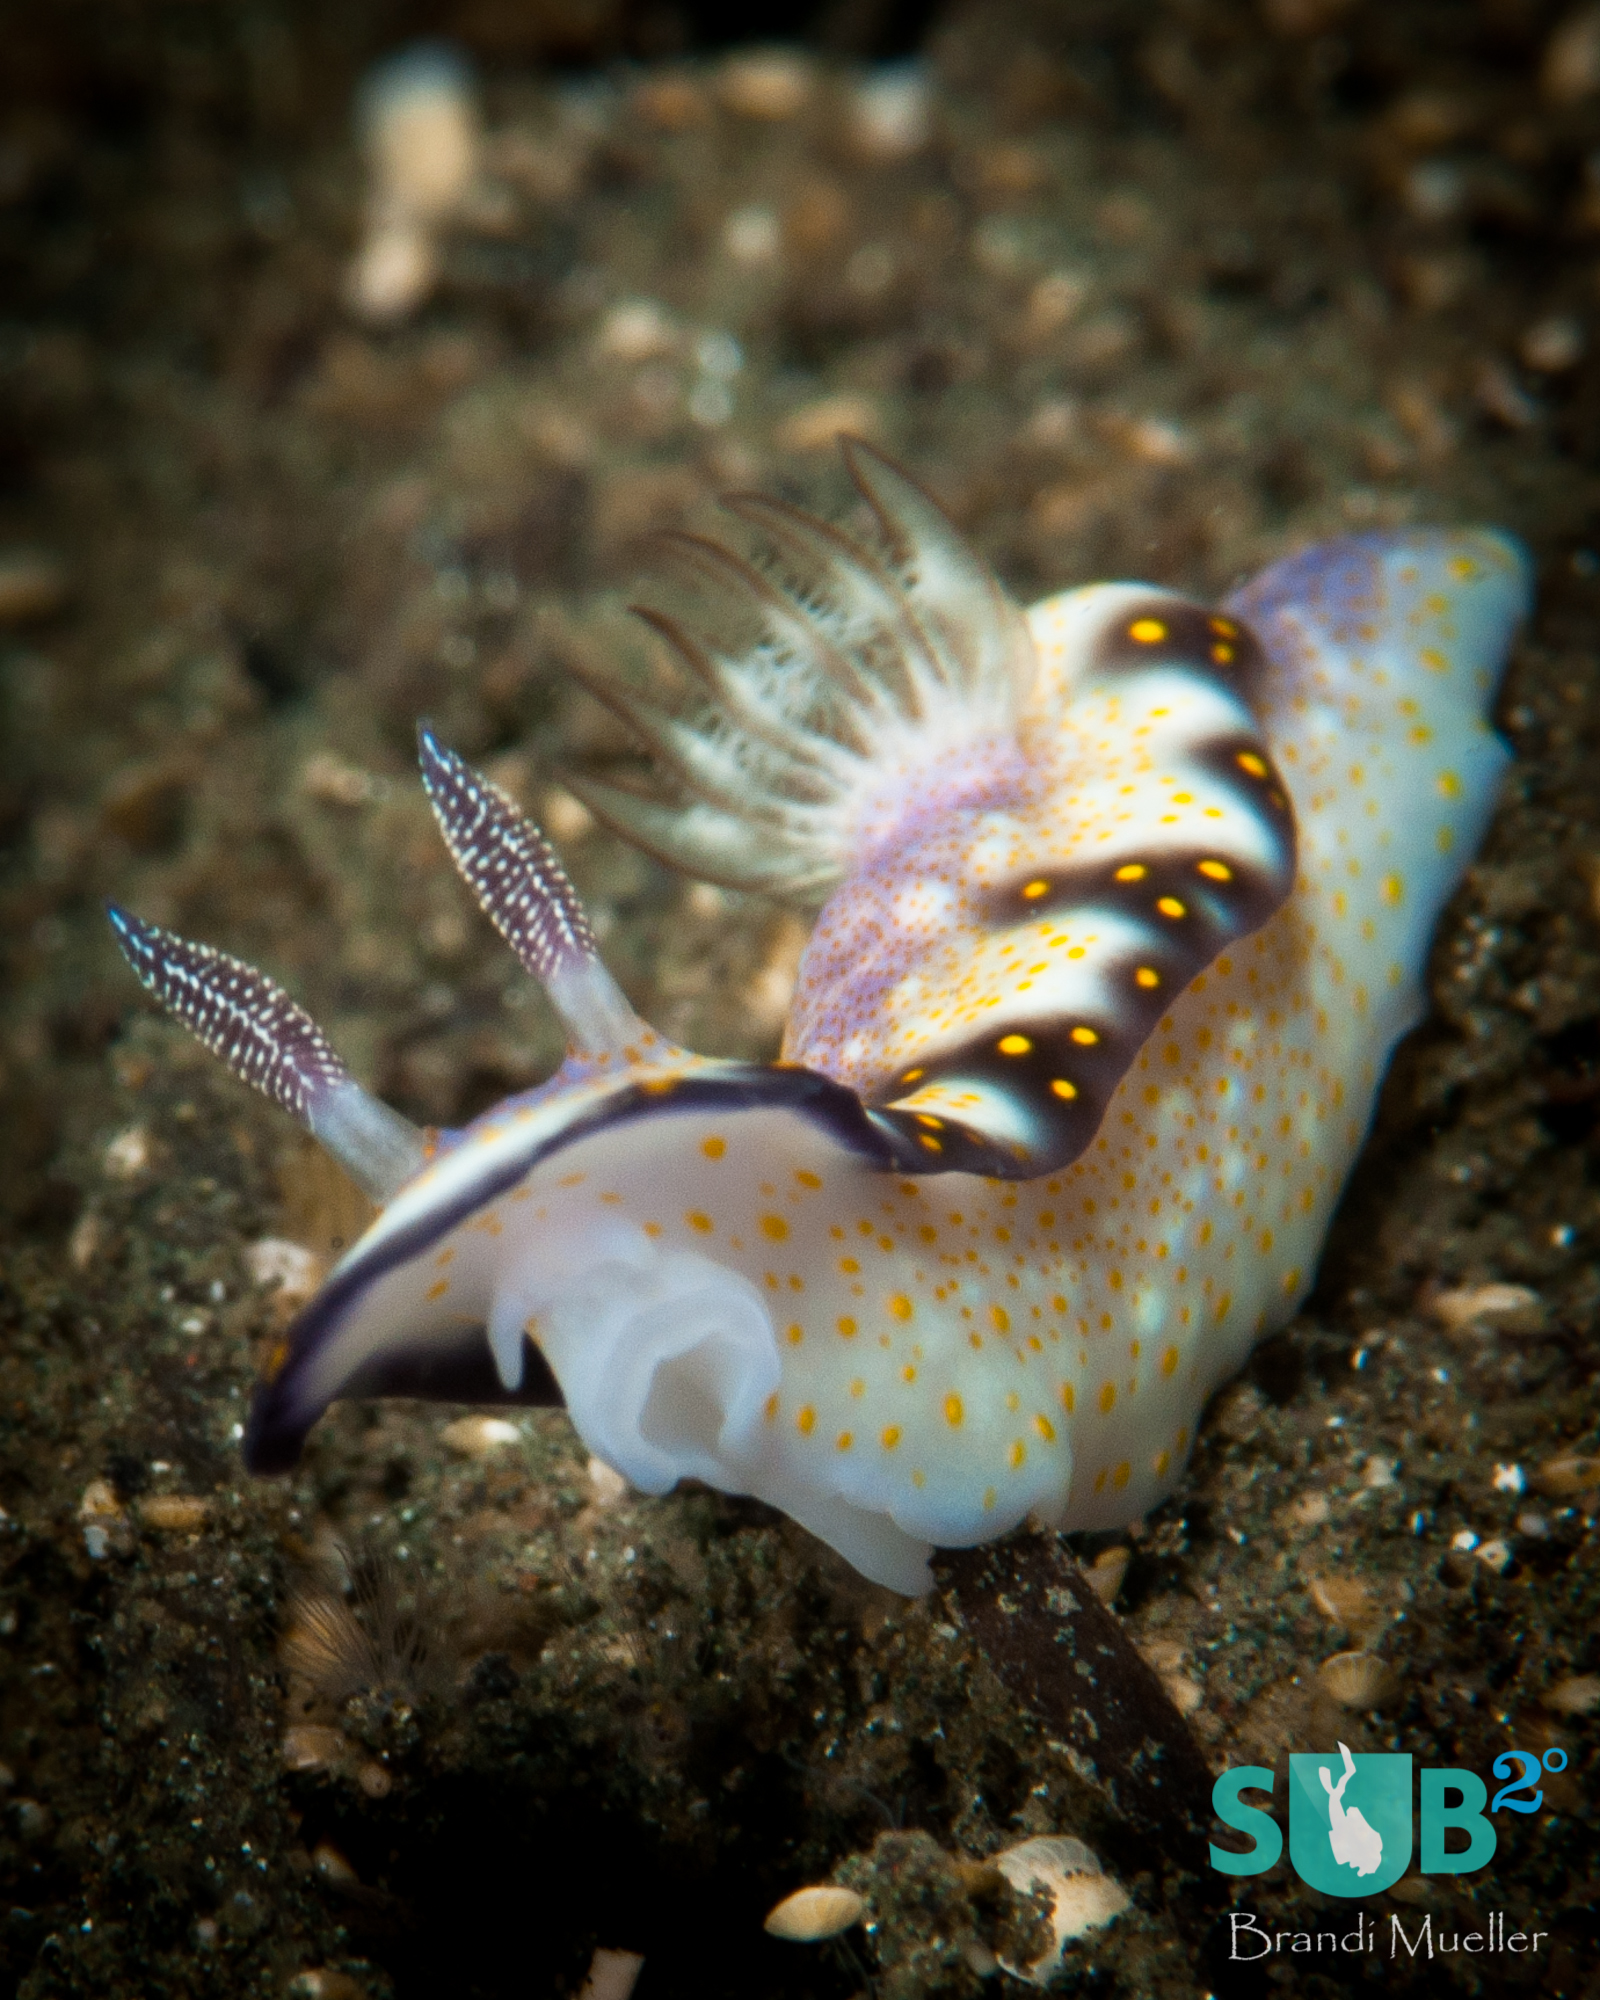 This nudibranch was crawling around the black sand during a muck dive.